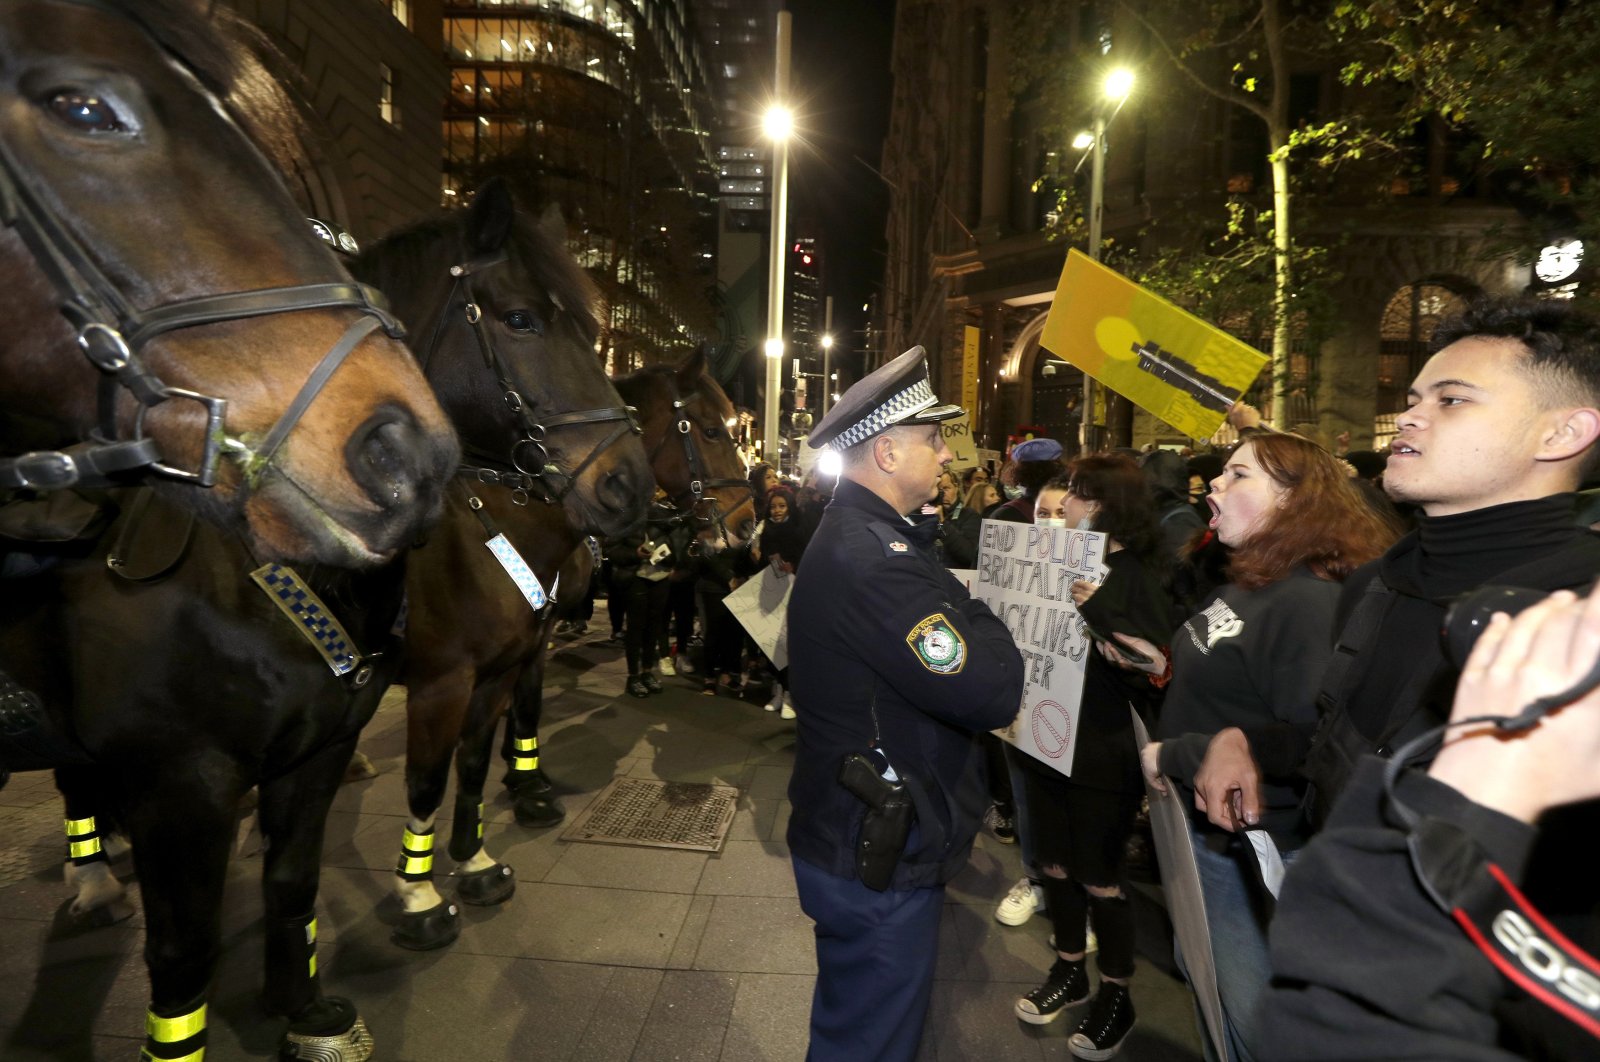 Protesters approach police on horseback as they gather in Sydney to support the cause of U.S. protests over the death of George Floyd, June 2, 2020,. (AP Photo)